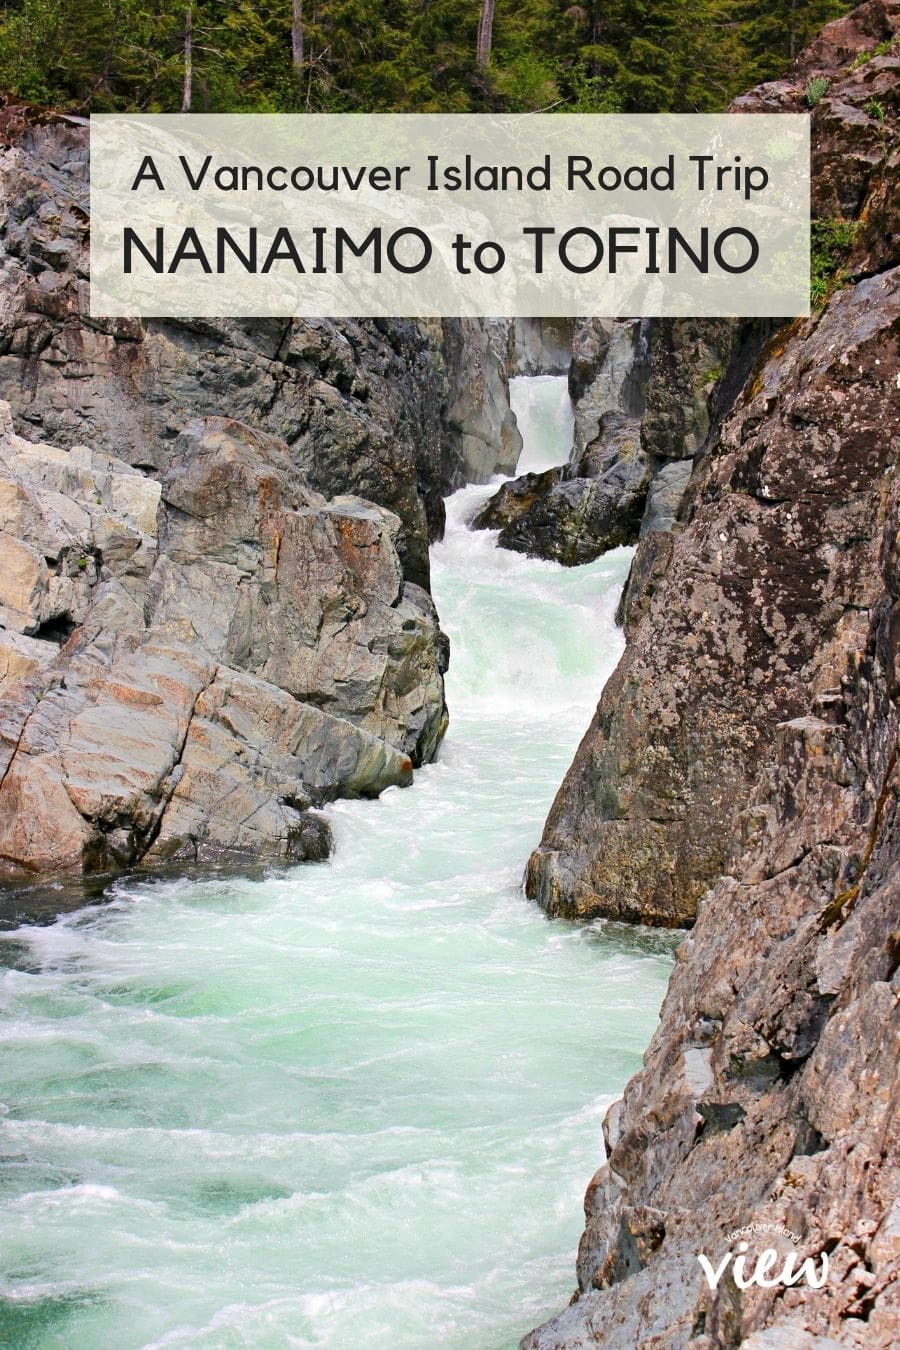 A Nanaimo to Tofino road trip and what to see along the way. Vancouver Island View